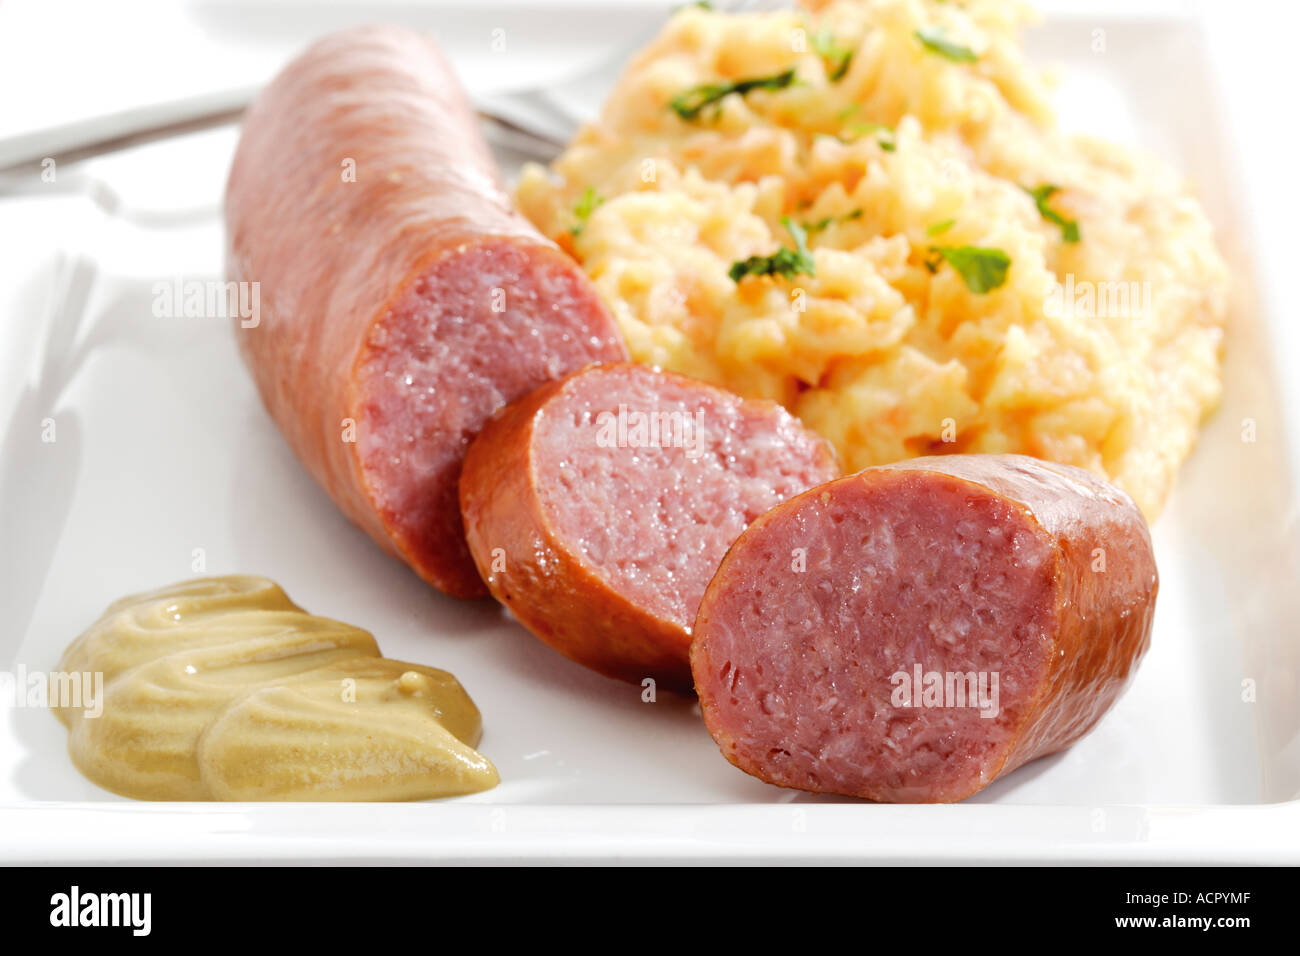 Minced meat sausage with potato-carrot puree Stock Photo